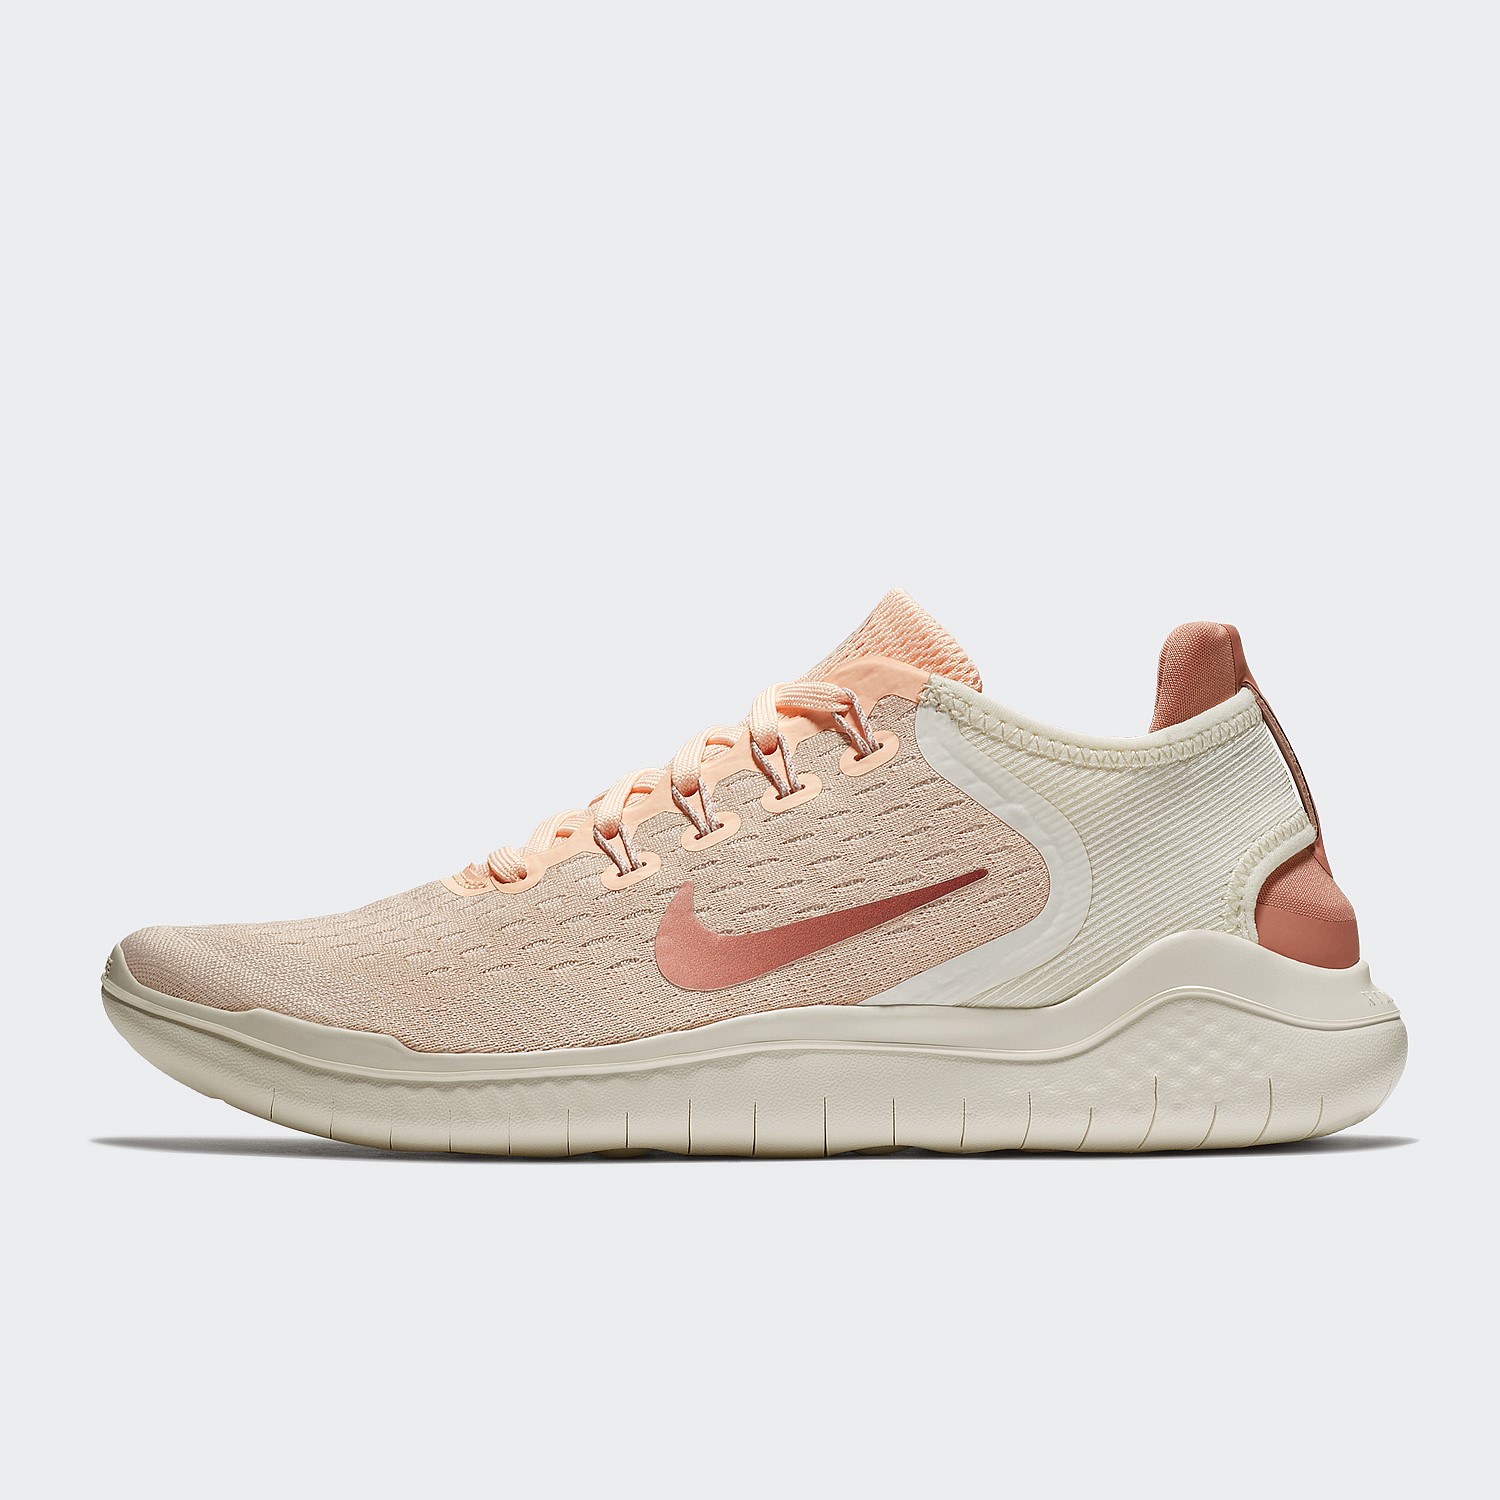 afterpay nike shoes nz